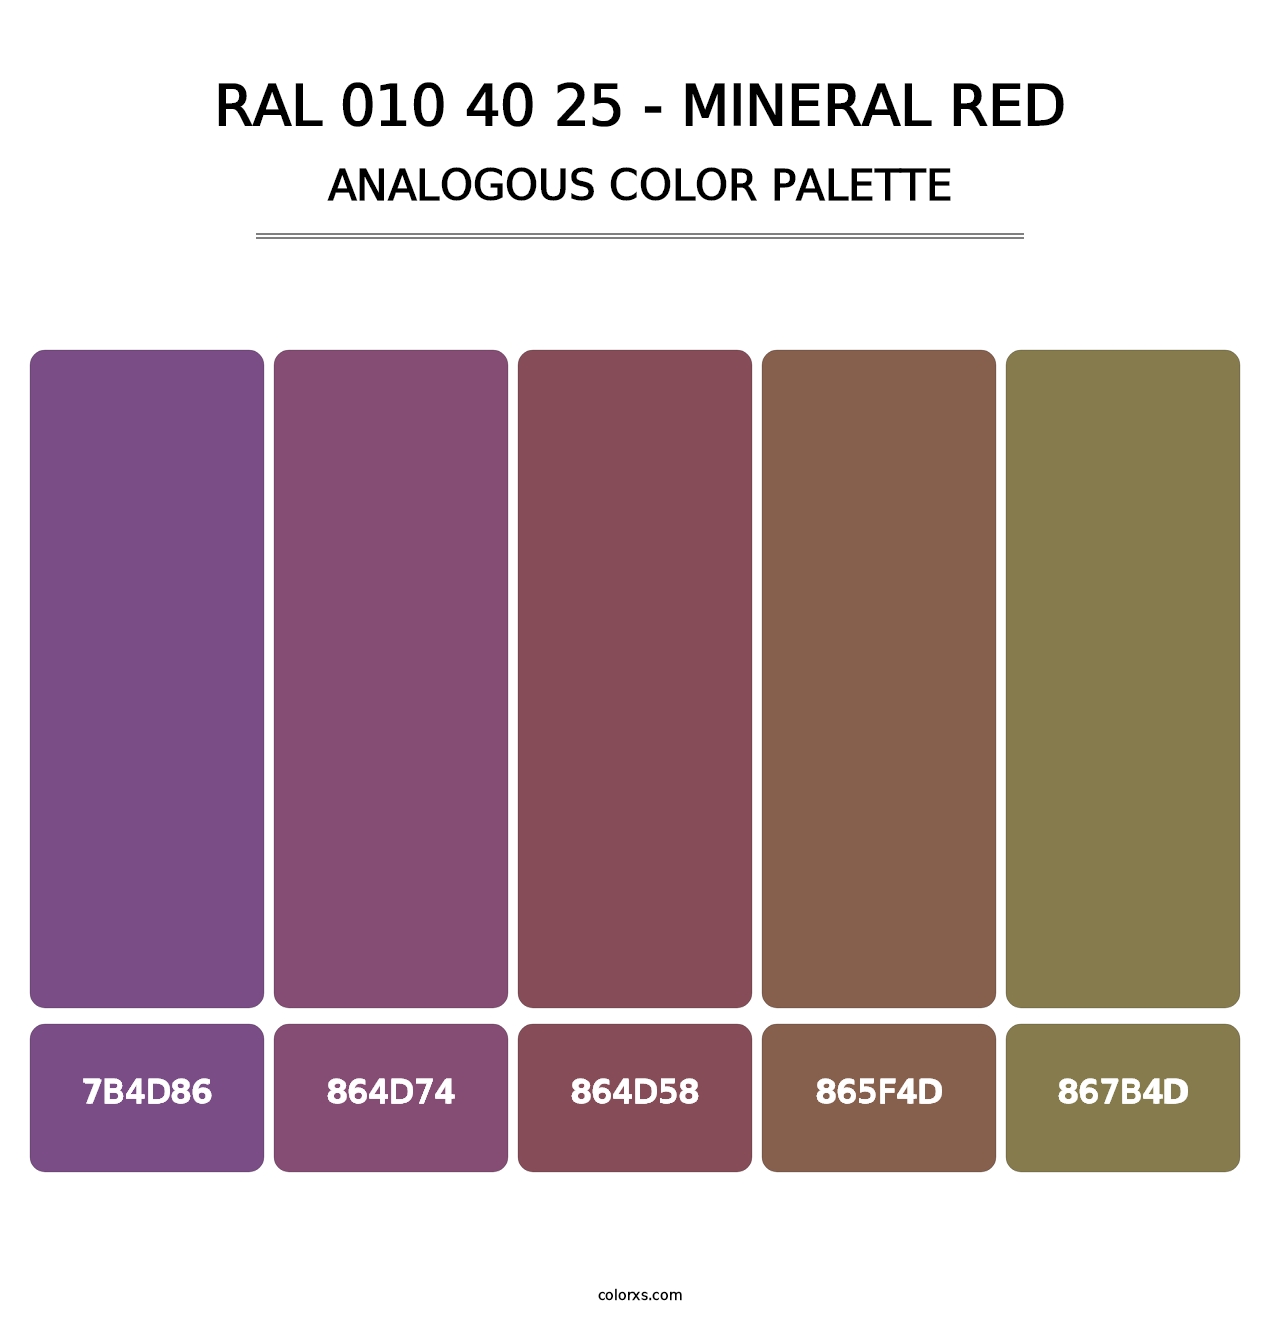 RAL 010 40 25 - Mineral Red - Analogous Color Palette